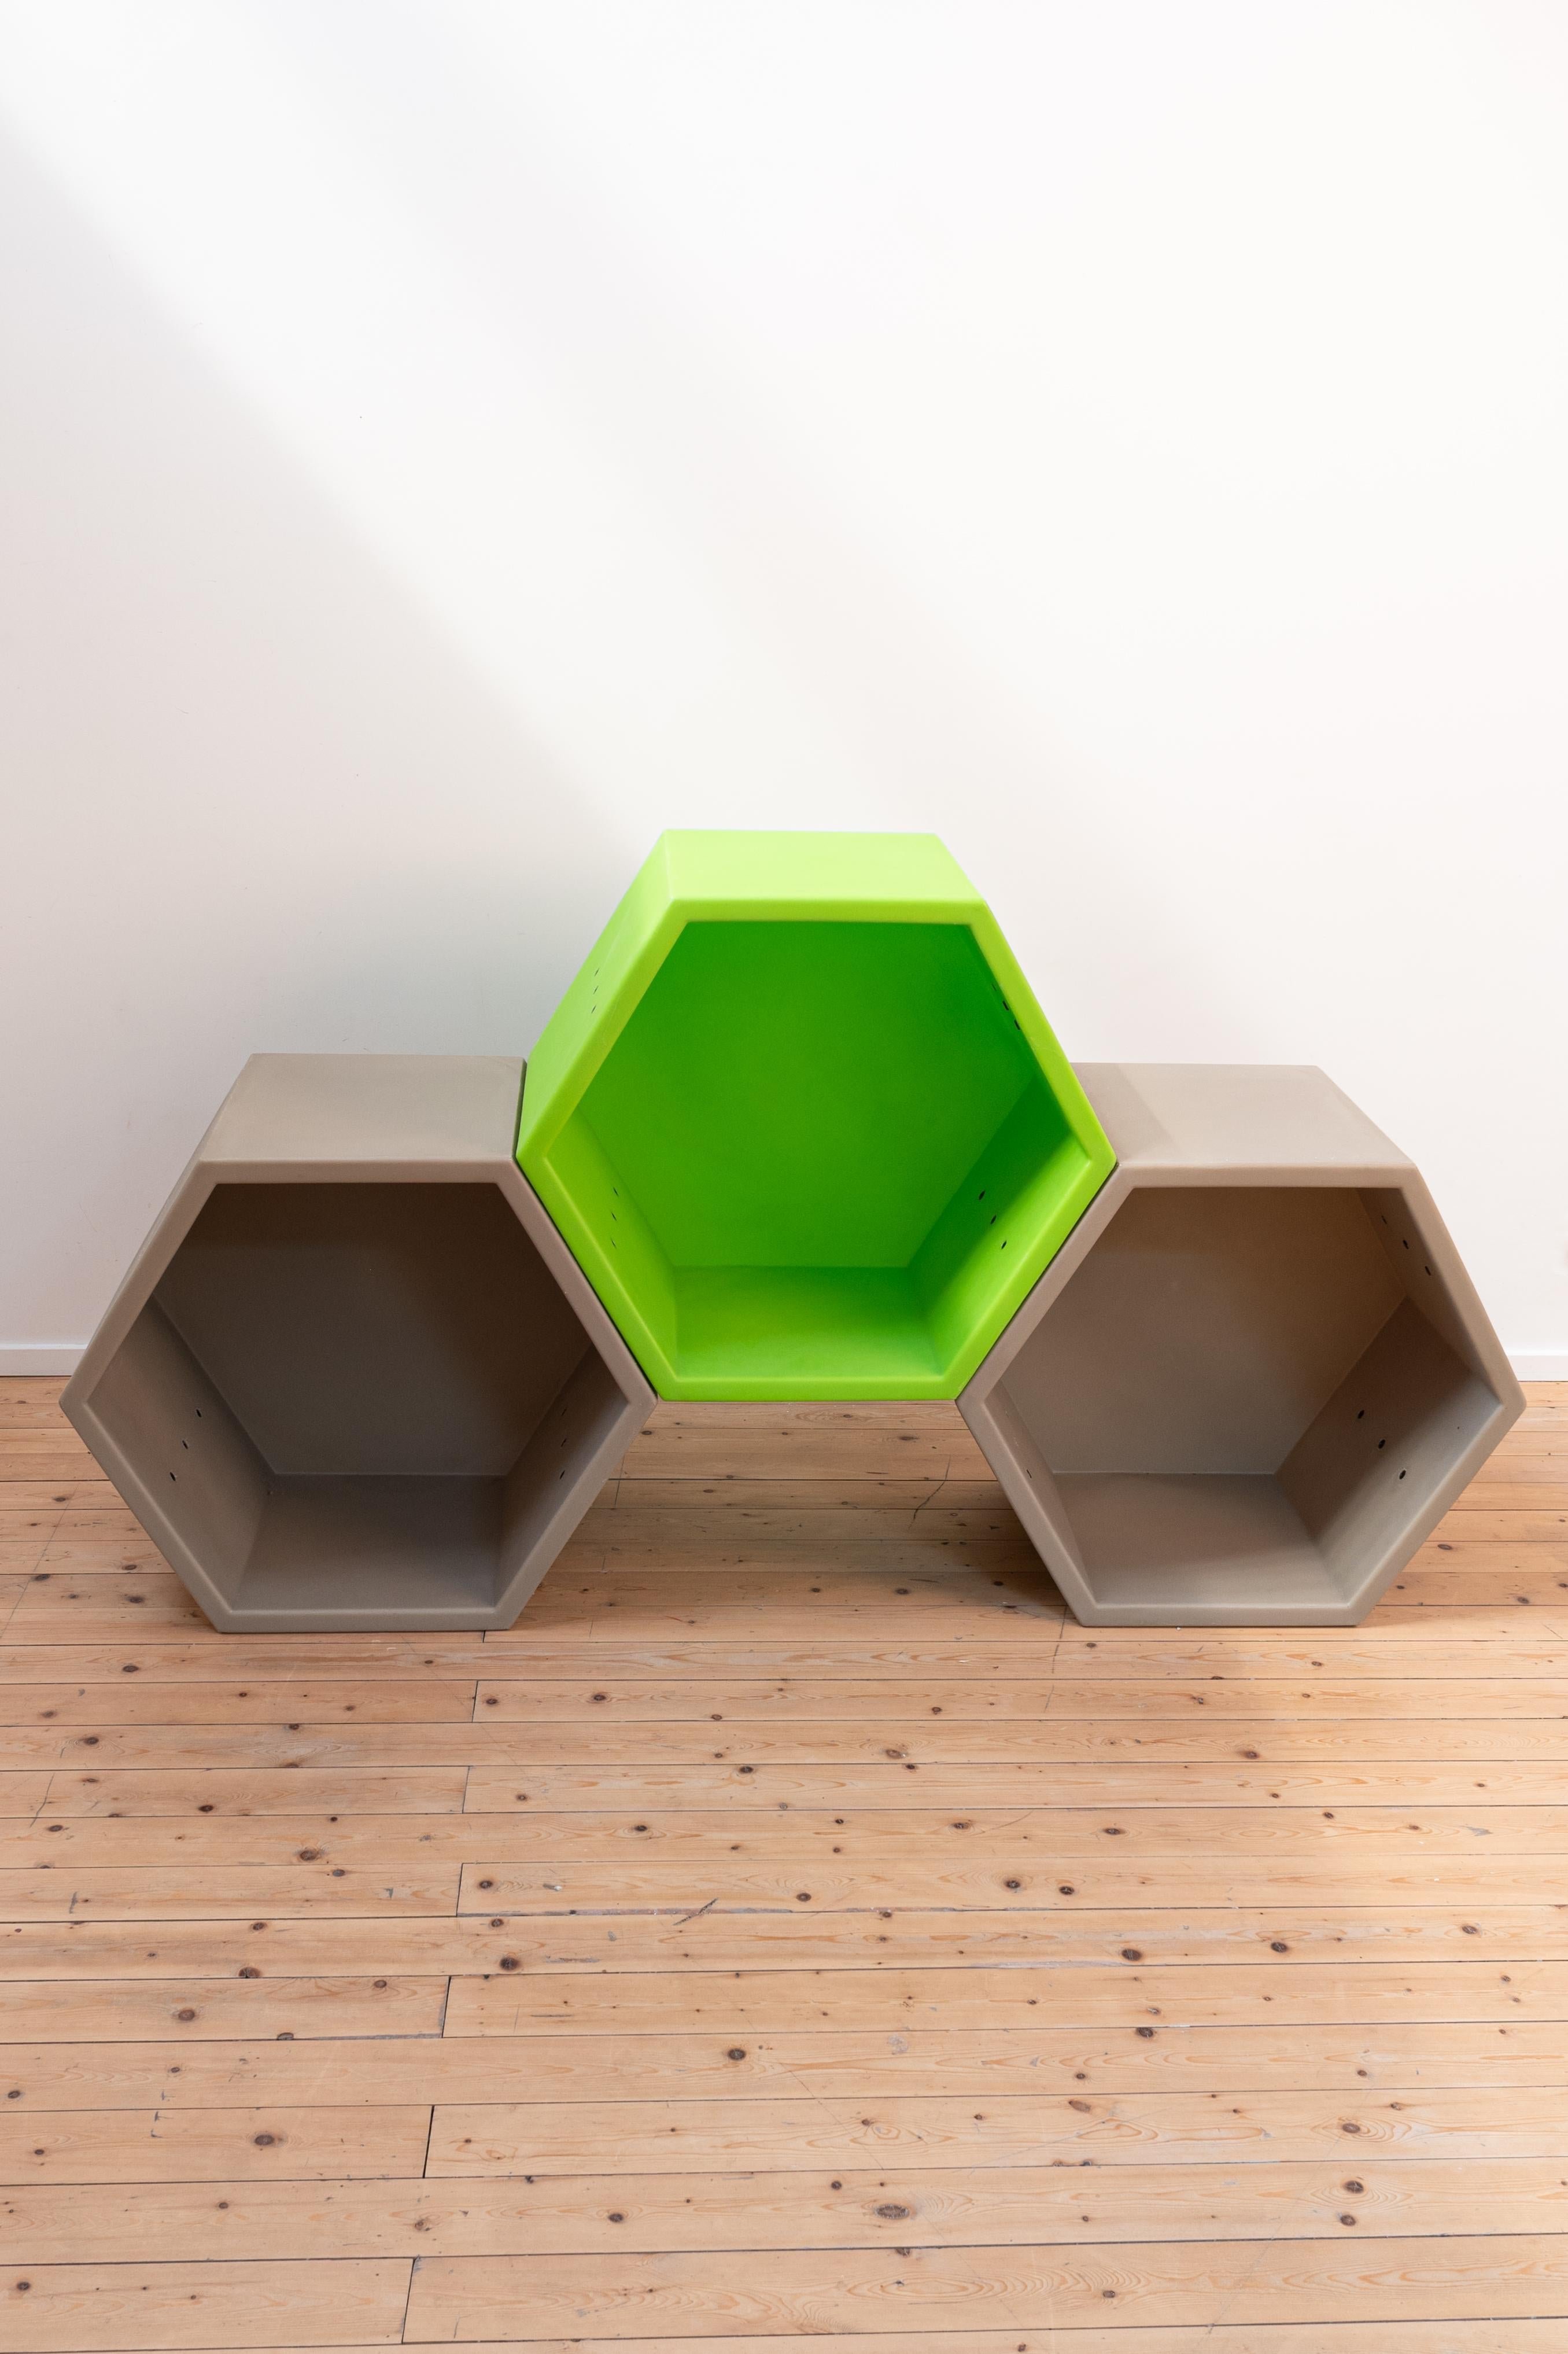 Honeycomb by Quinze & Milan and designer: Clive Wilkinson

Set comprises 1 green module and 2 grey modules. The black module is damaged and is added for free (if you want it) if you buy the set. 

